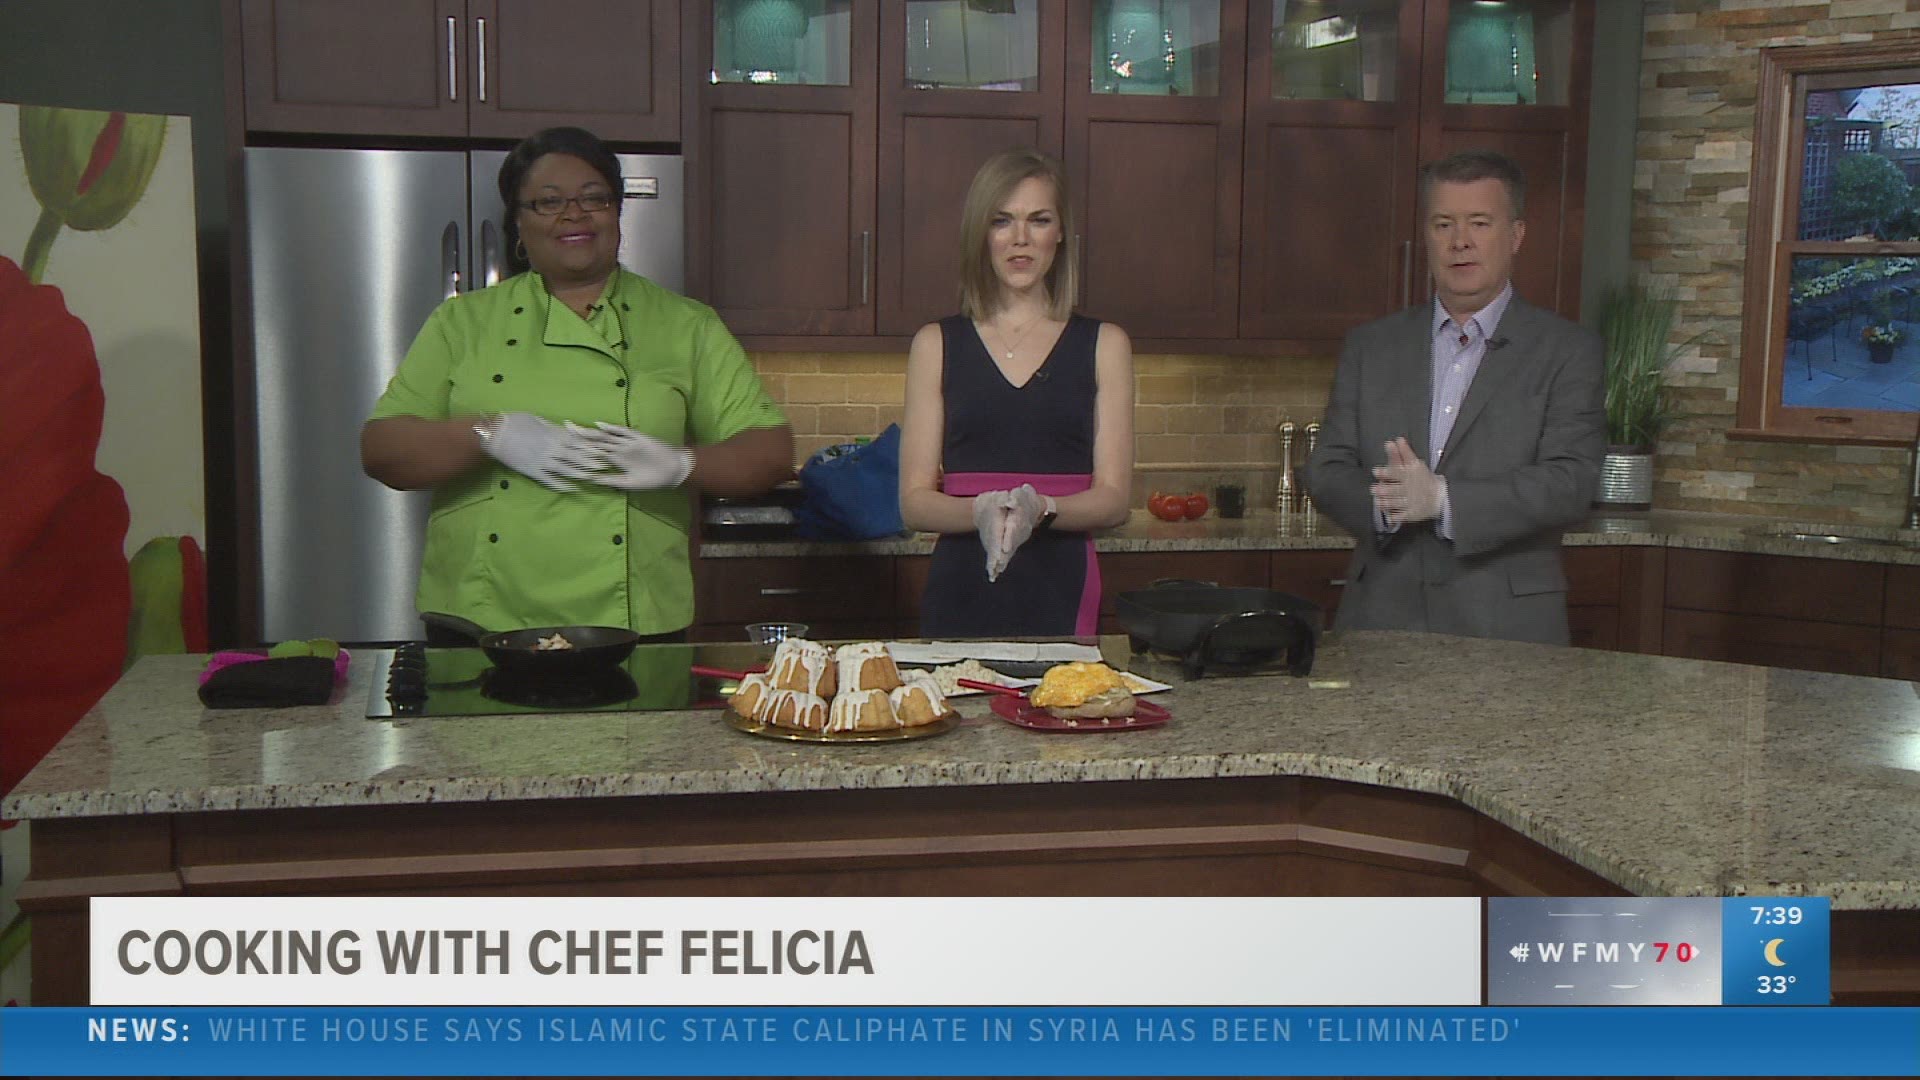 She joins us back in the News 2 kitchen teaching us to rework leftovers from the week